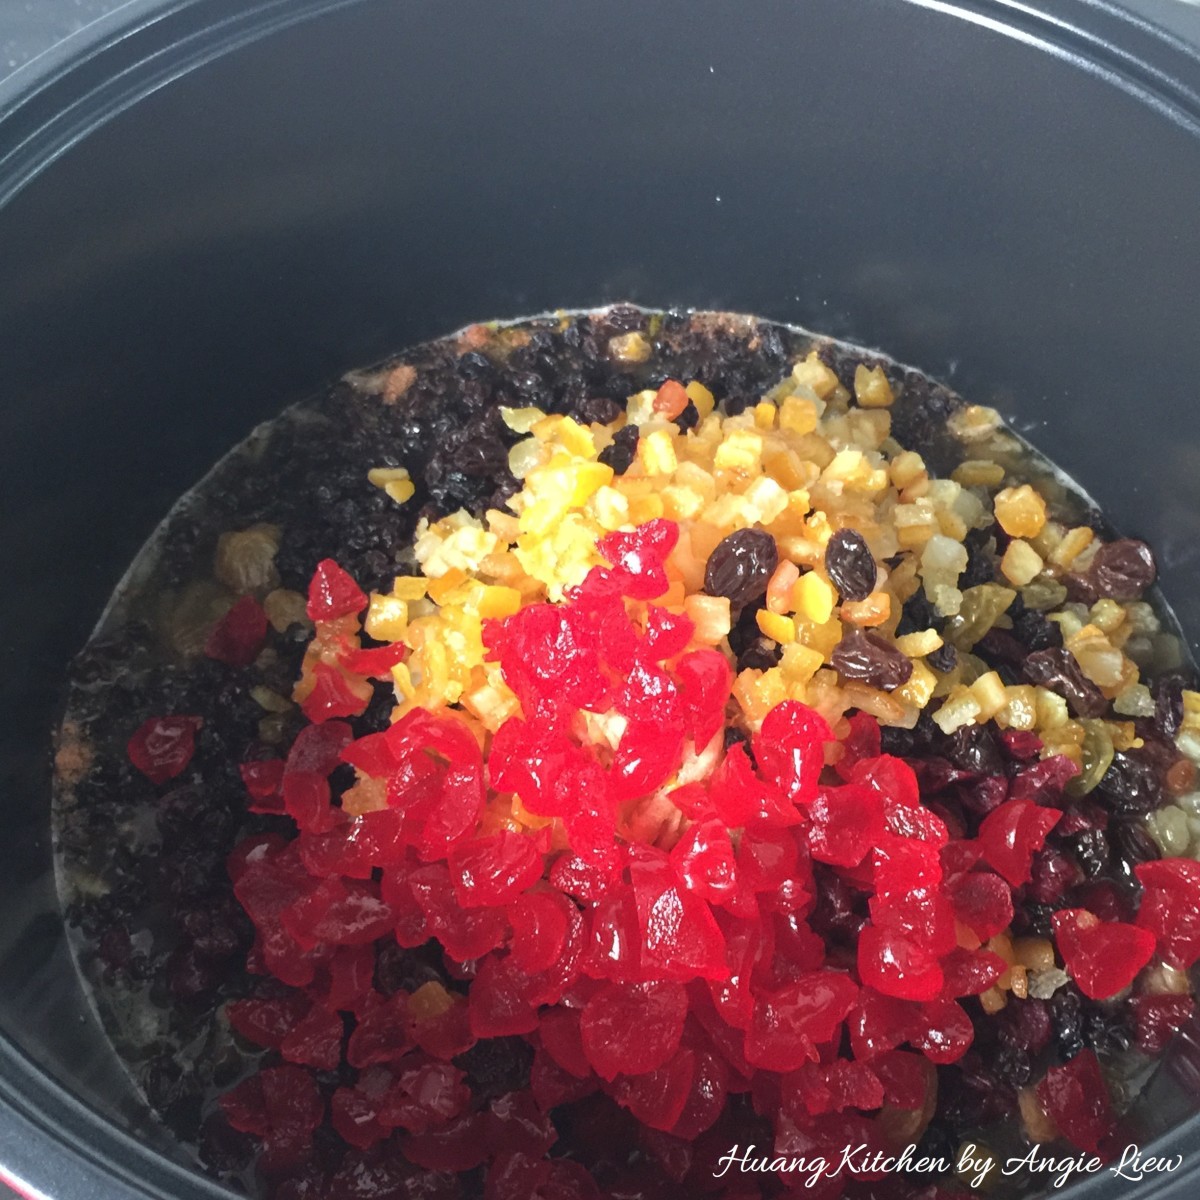 Christmas Fruit Mince Recipe - add candied fruits